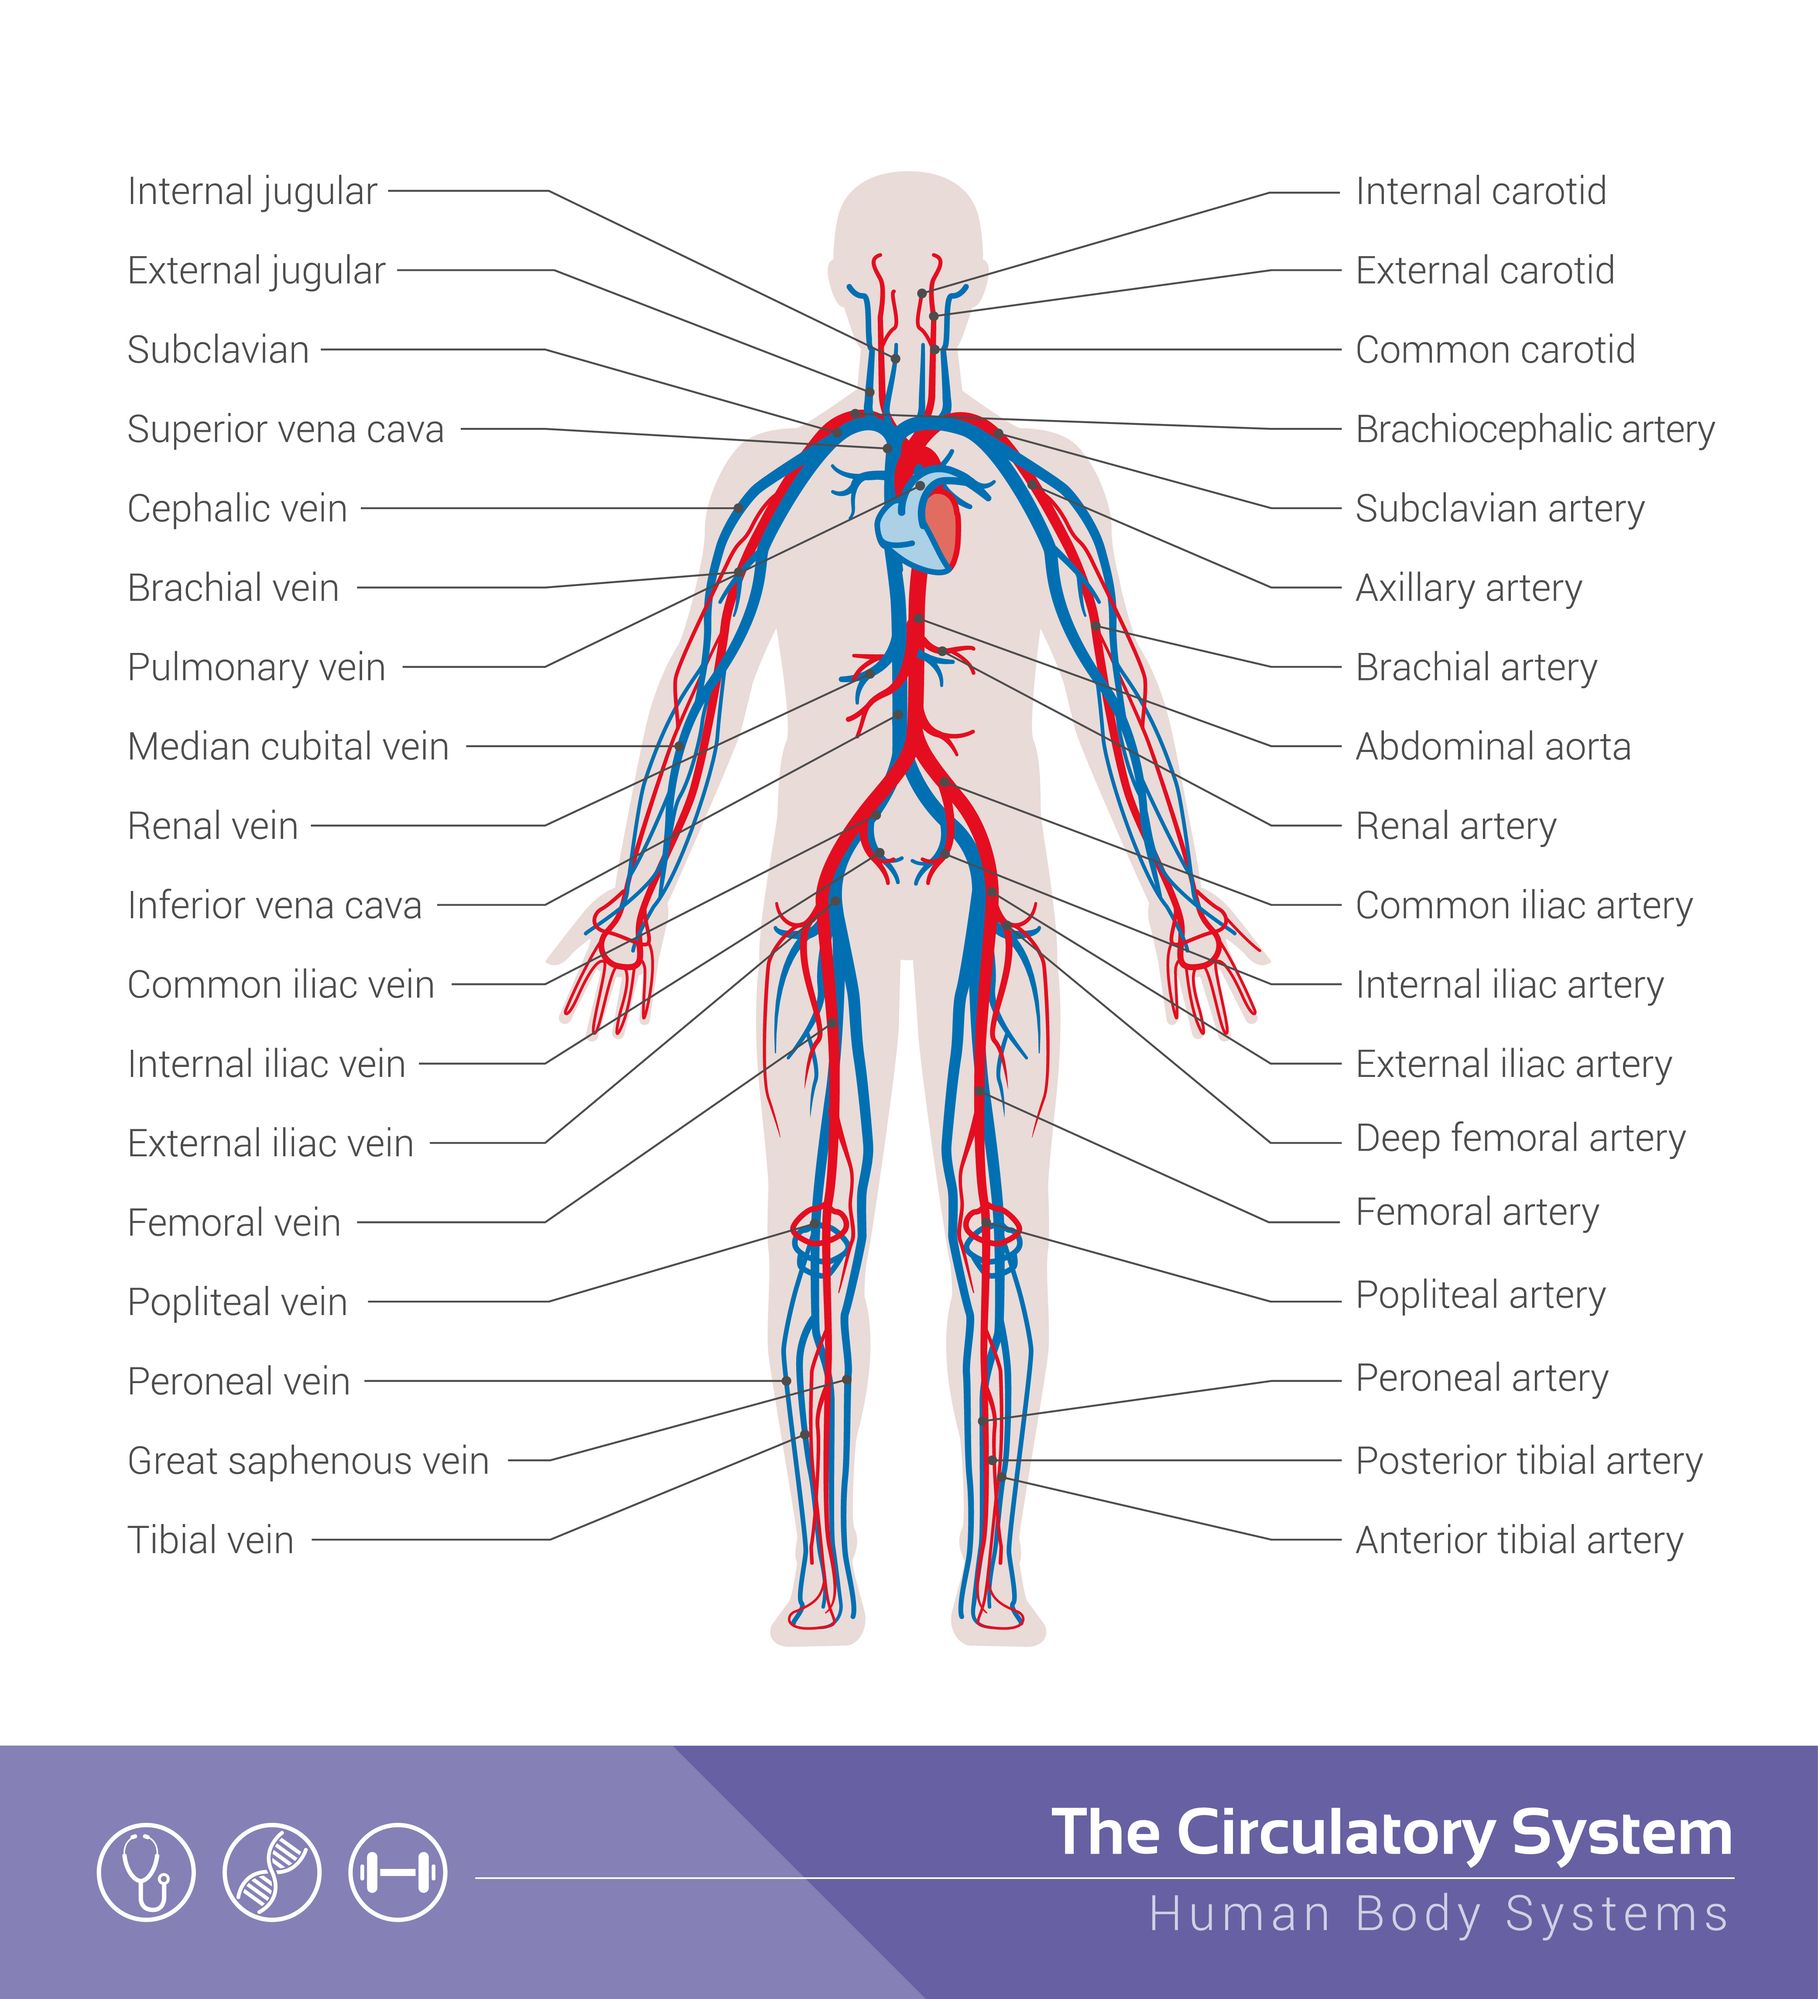 Day 2: The Circulatory System